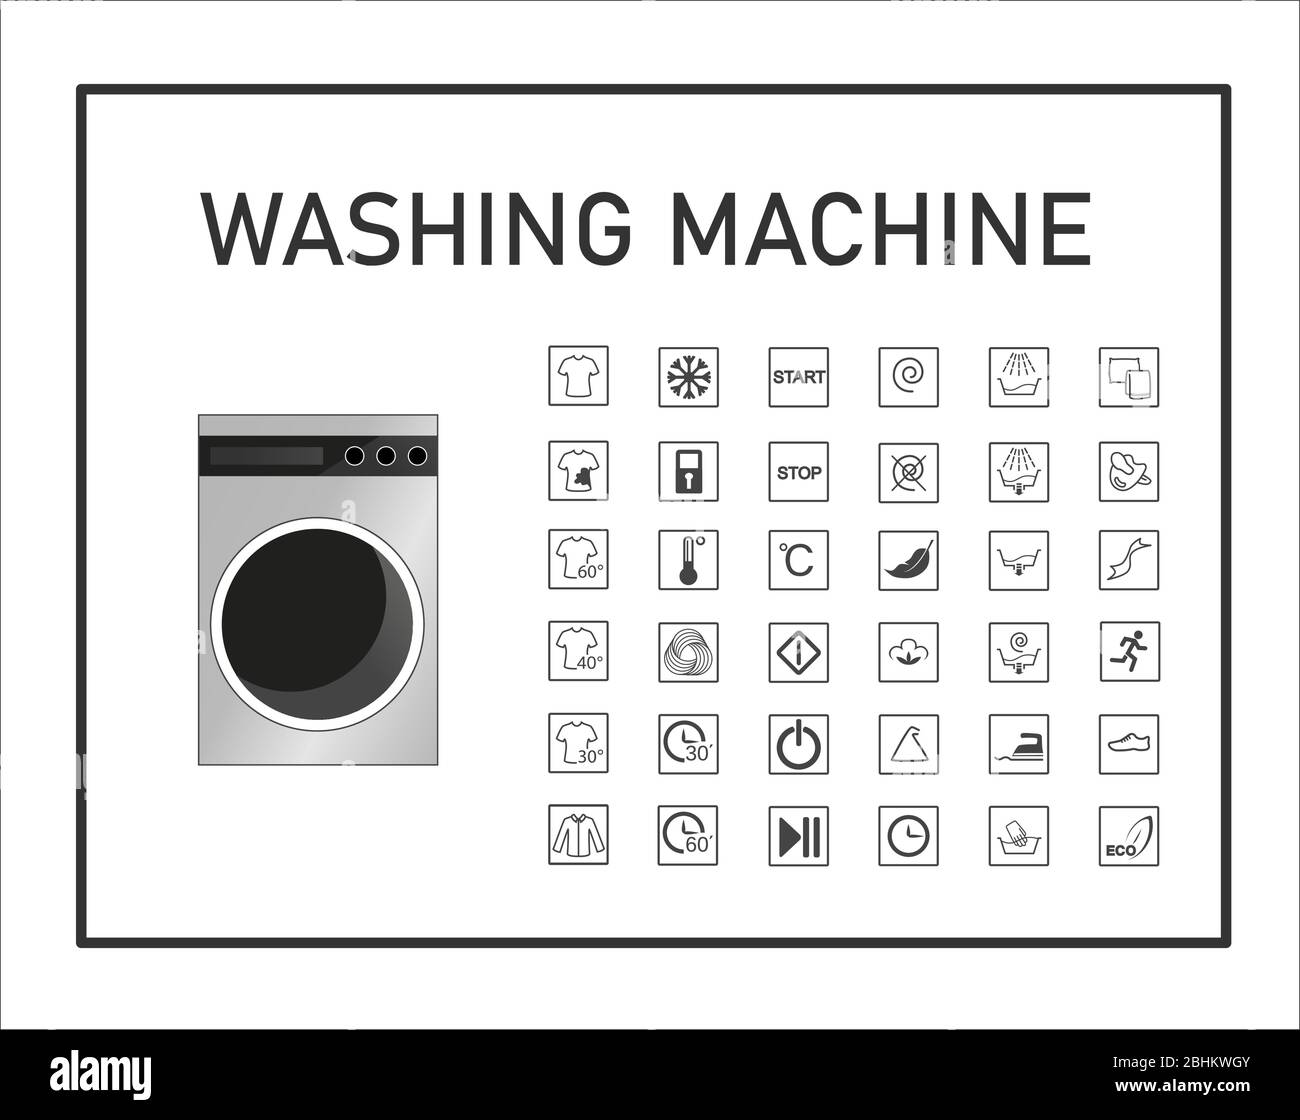 Washing machine manual icon set. Signs and symbols for washing machine exploitation manual. Instructions and function description. Vector isolated Stock Vector